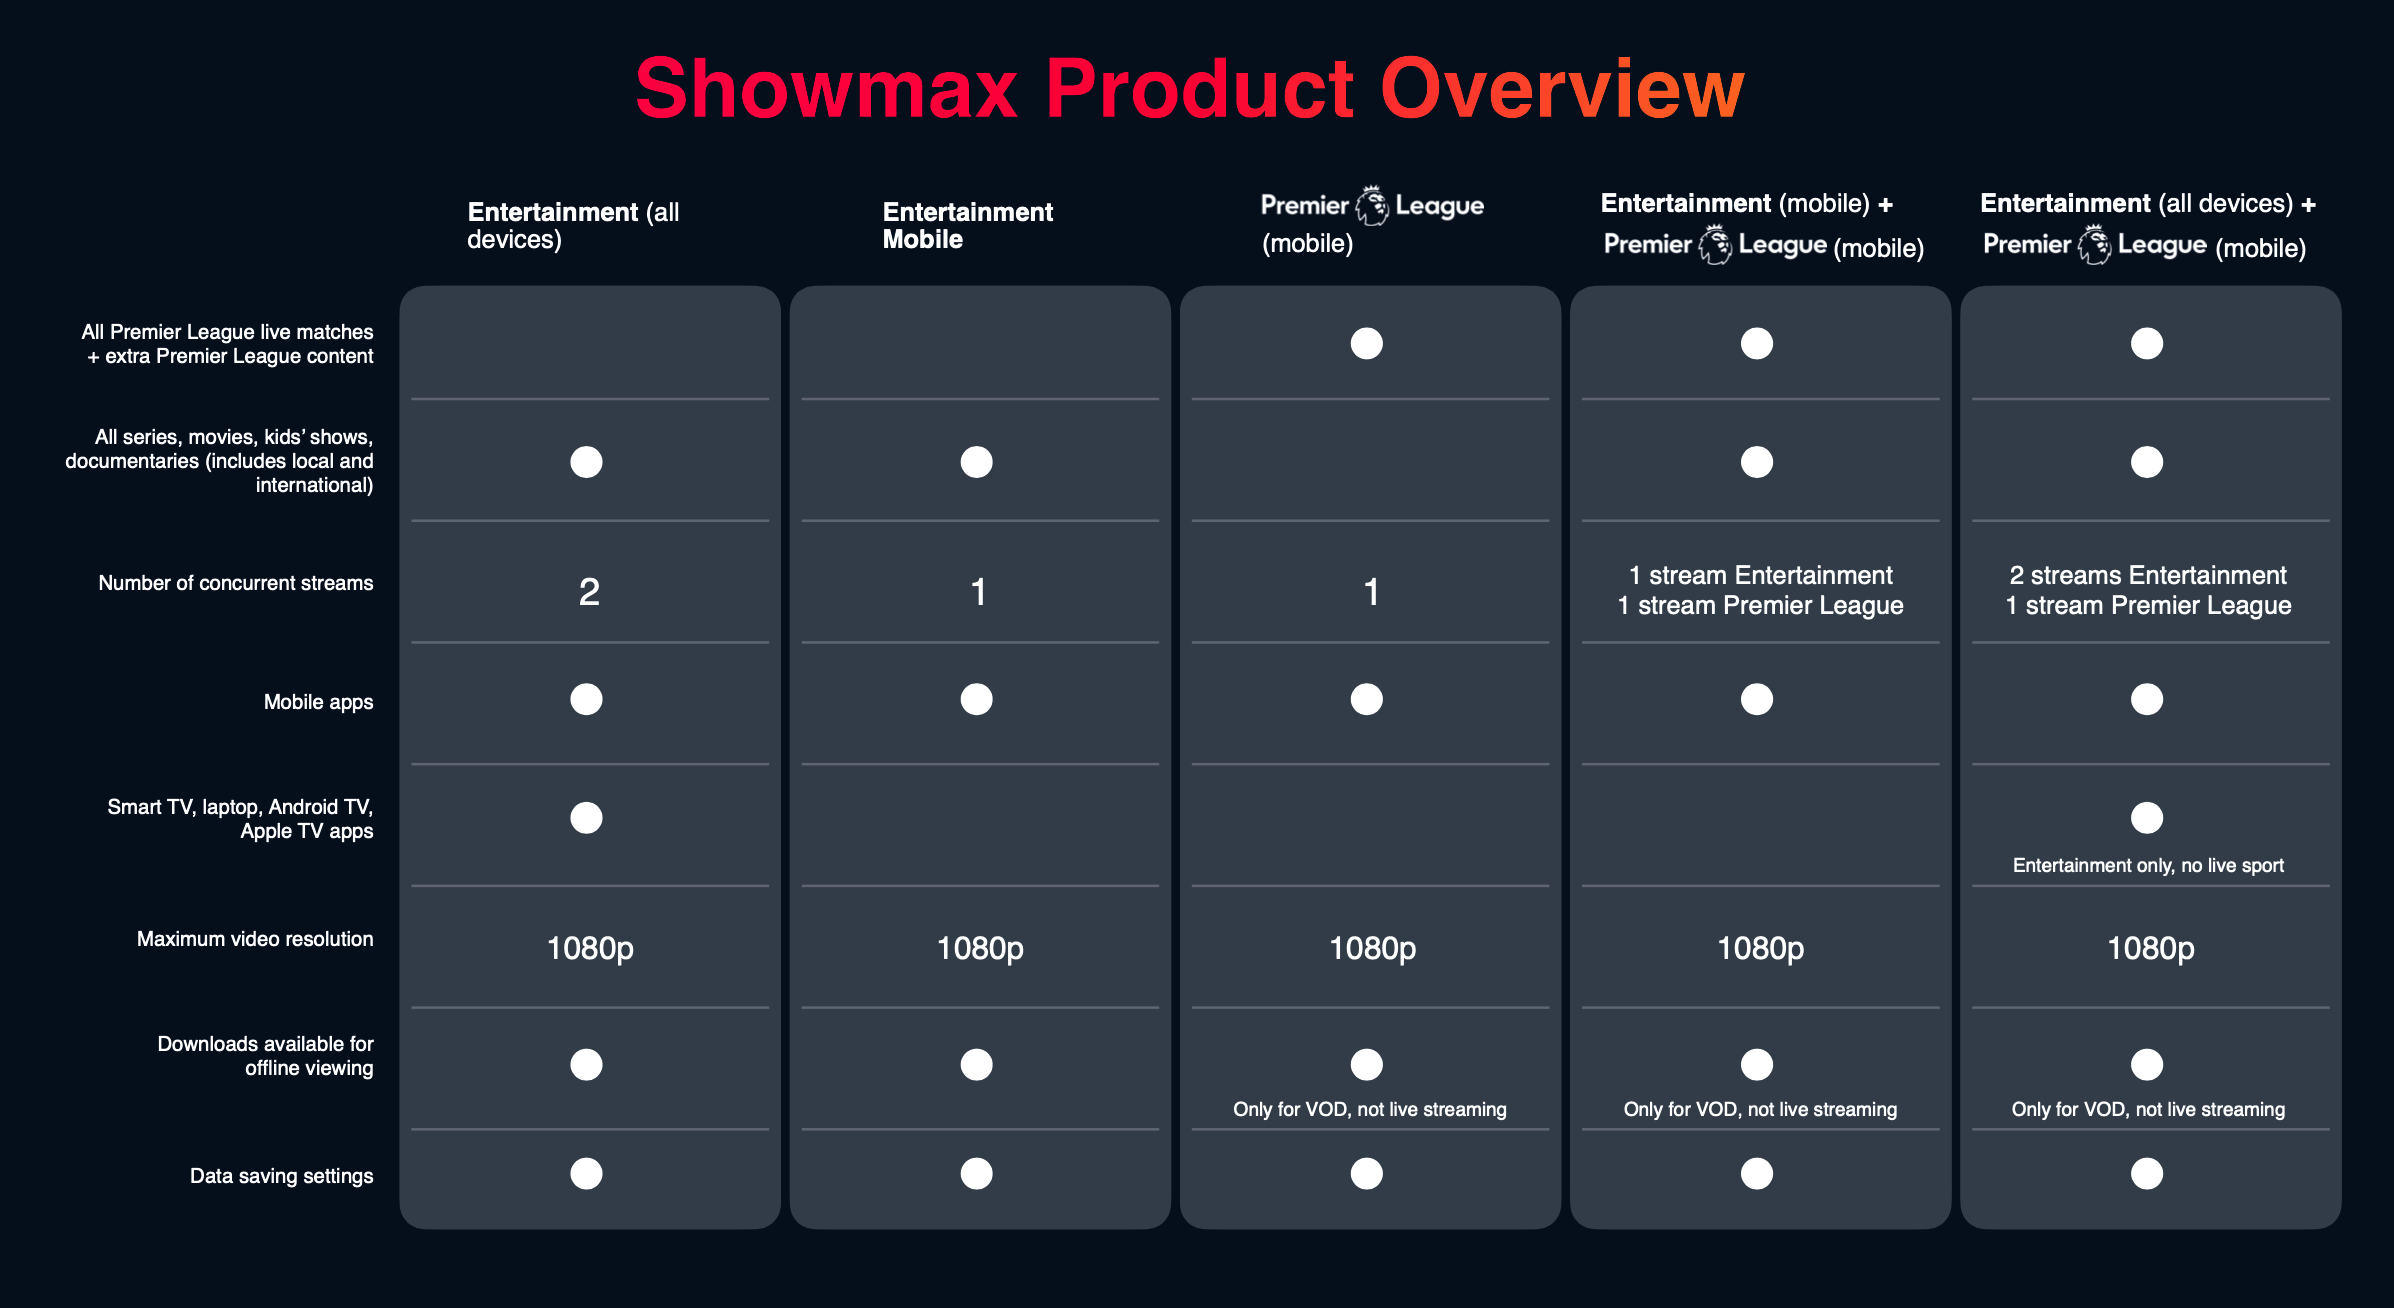 The new Showmax has arrived to change the game for streaming in Africa